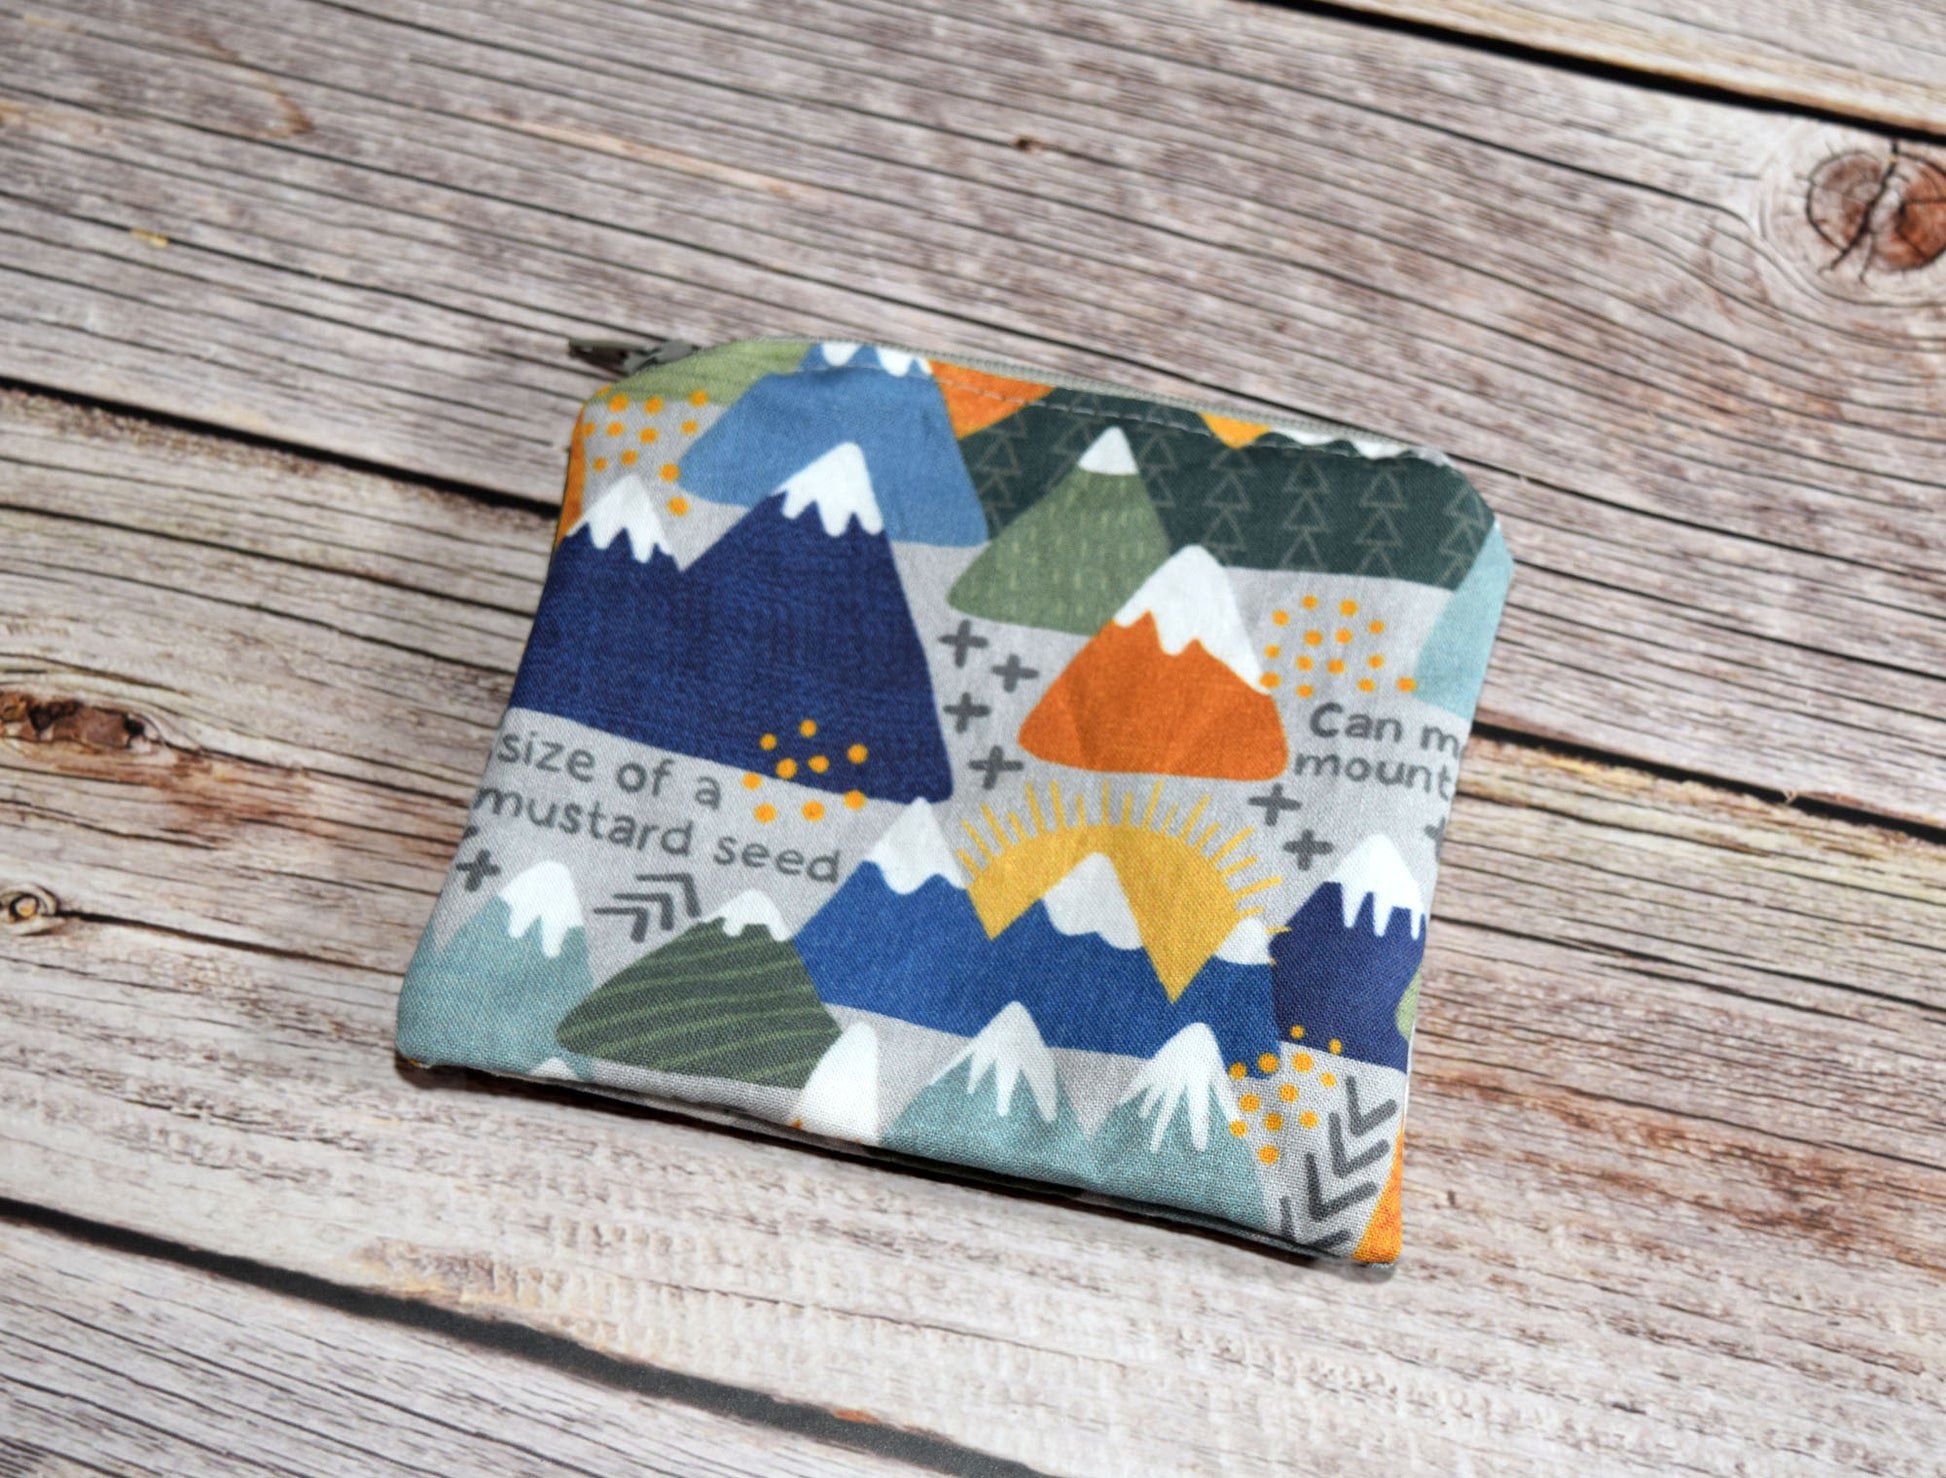 faith can move mountains, catholic zipper pouch, catholic rosary pouch, catholic gift for boys, catholic gift for men, small catholic pouch, mountain pouch, small catholic wallet